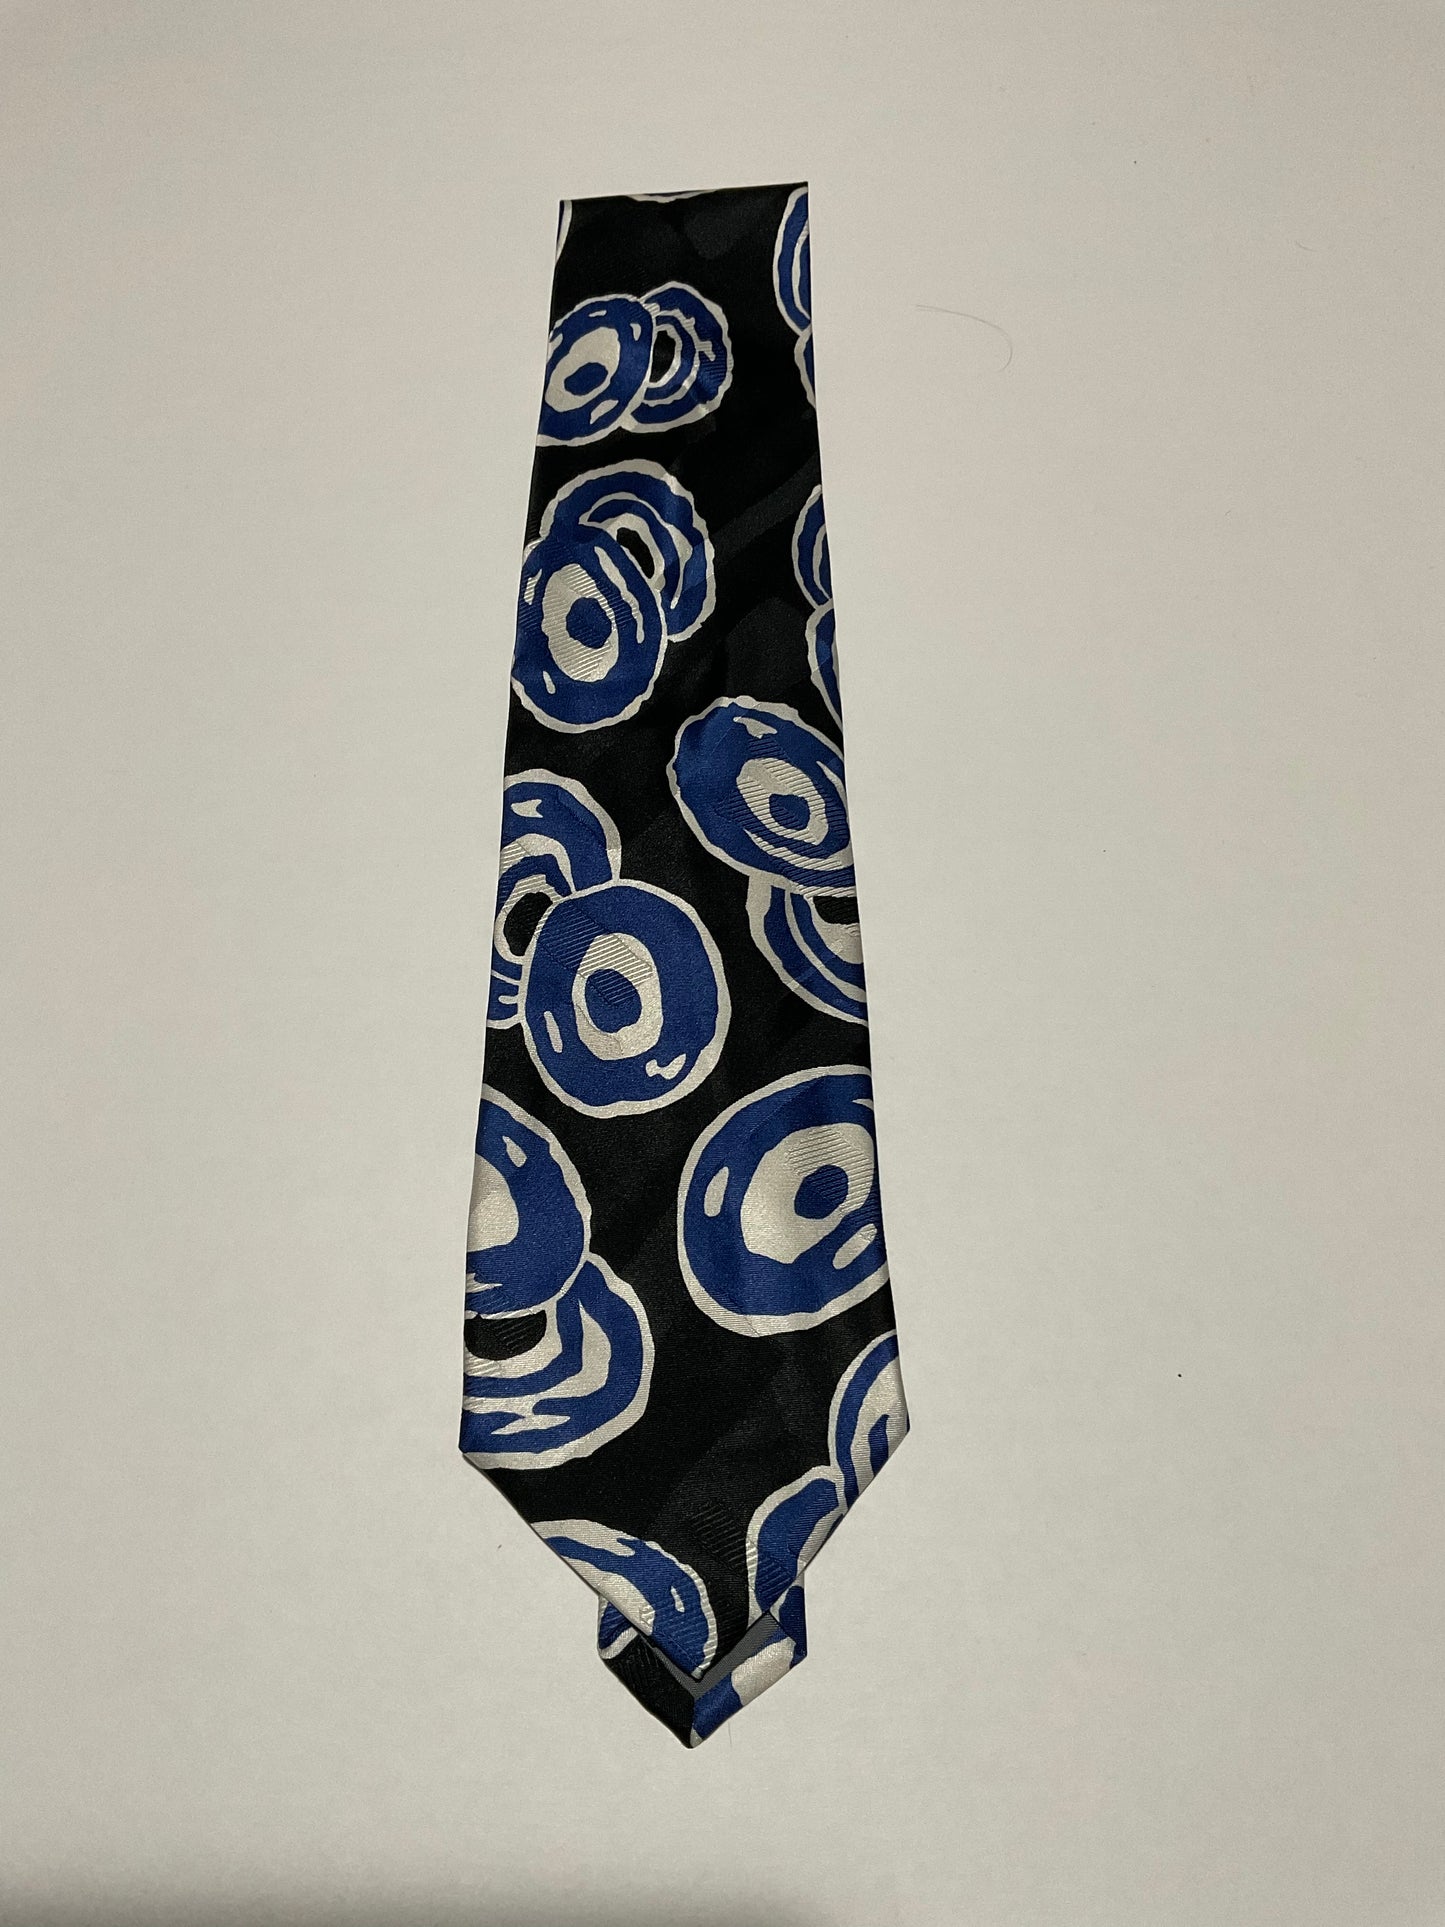 TIE / PURE SILK / NEW / APPX. 3 1/2” TO 3 3/4” WIDE / HAND MADE IN JAPAN